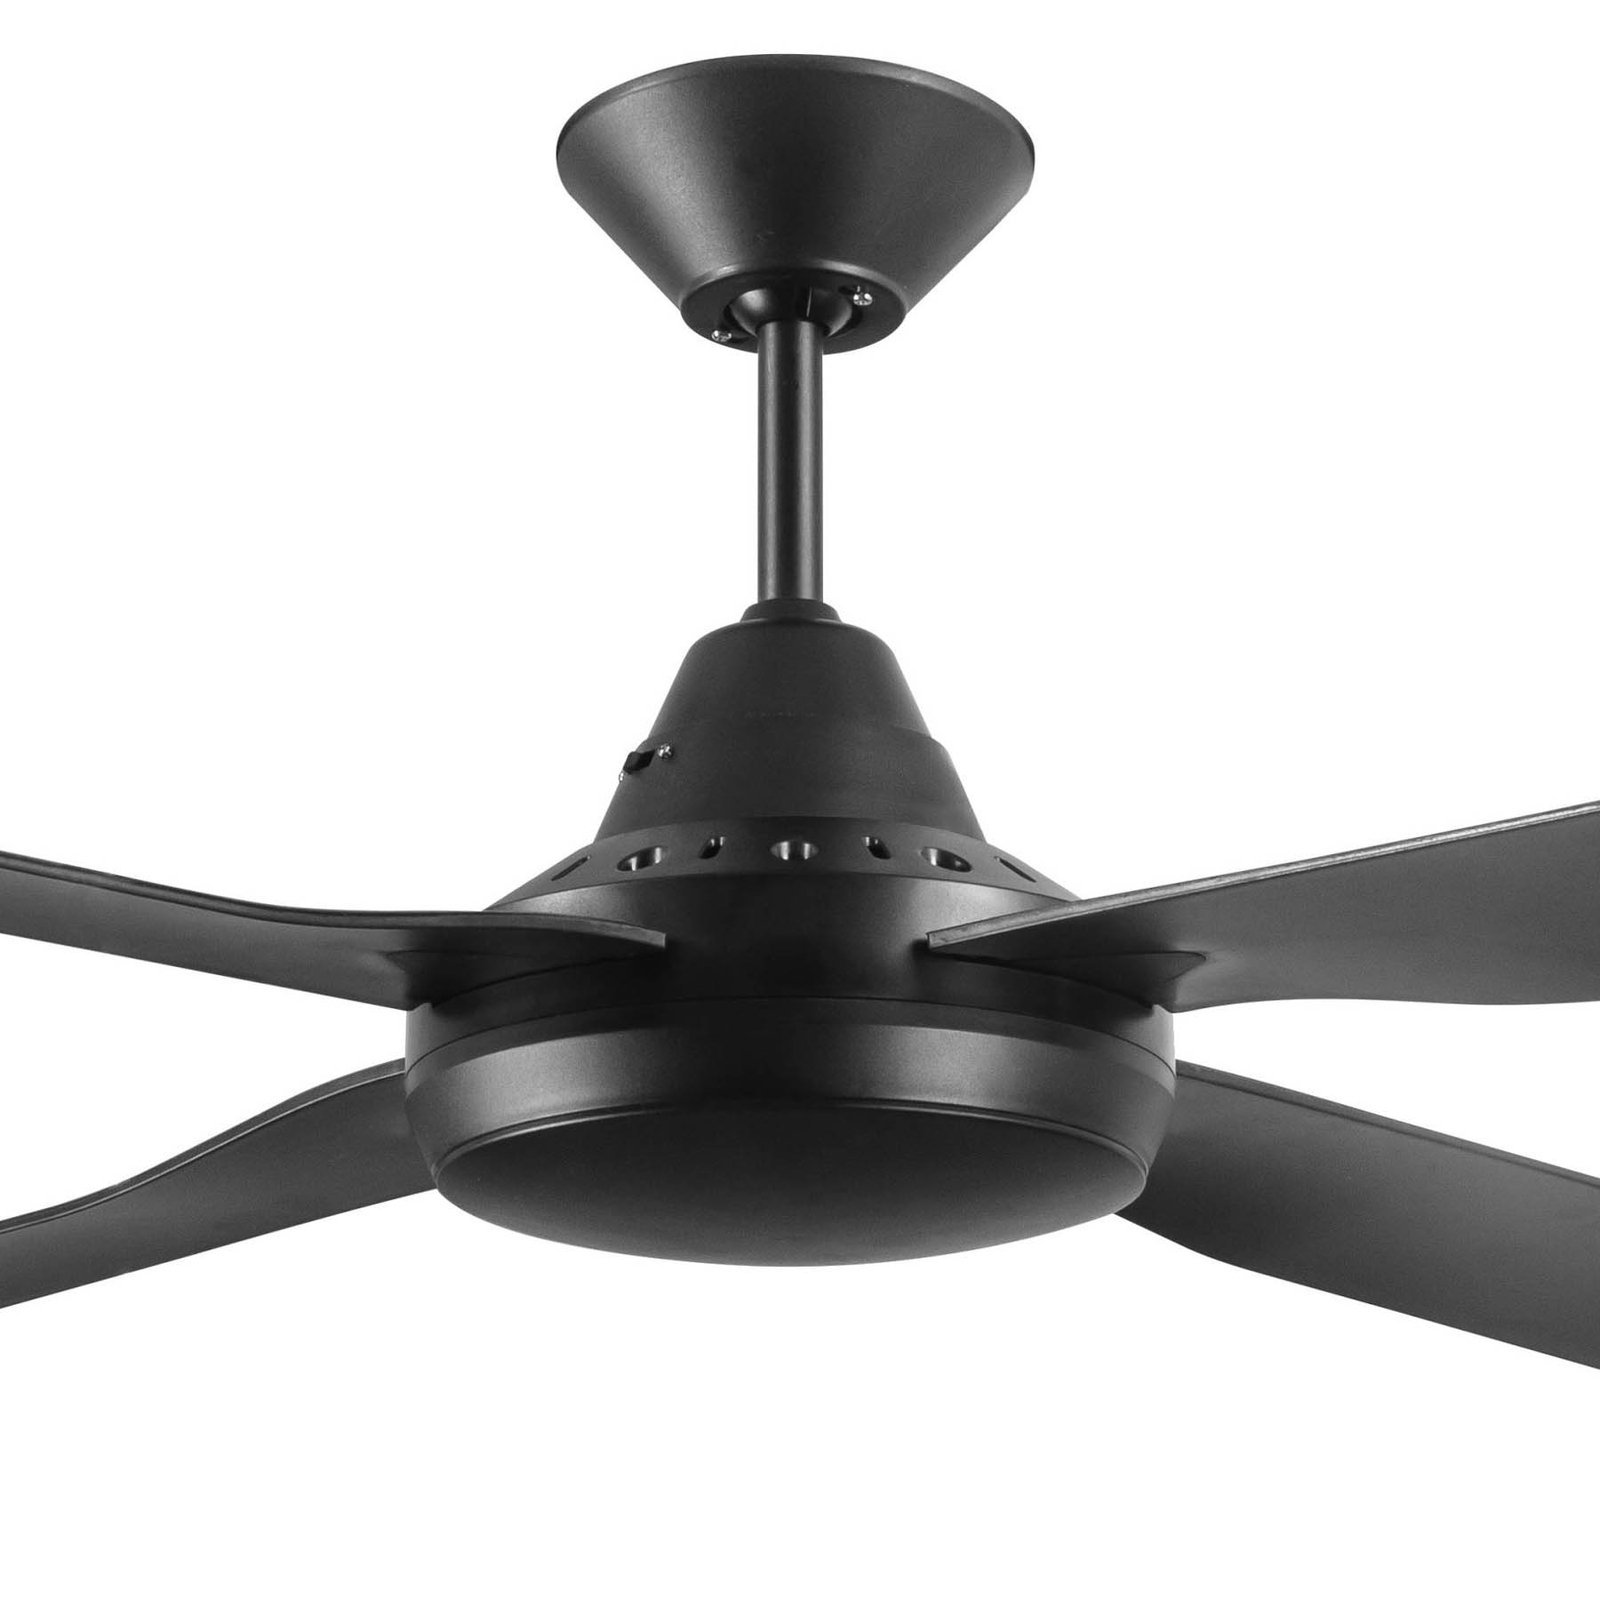 Beacon ceiling fan with light Moonah, black, quiet